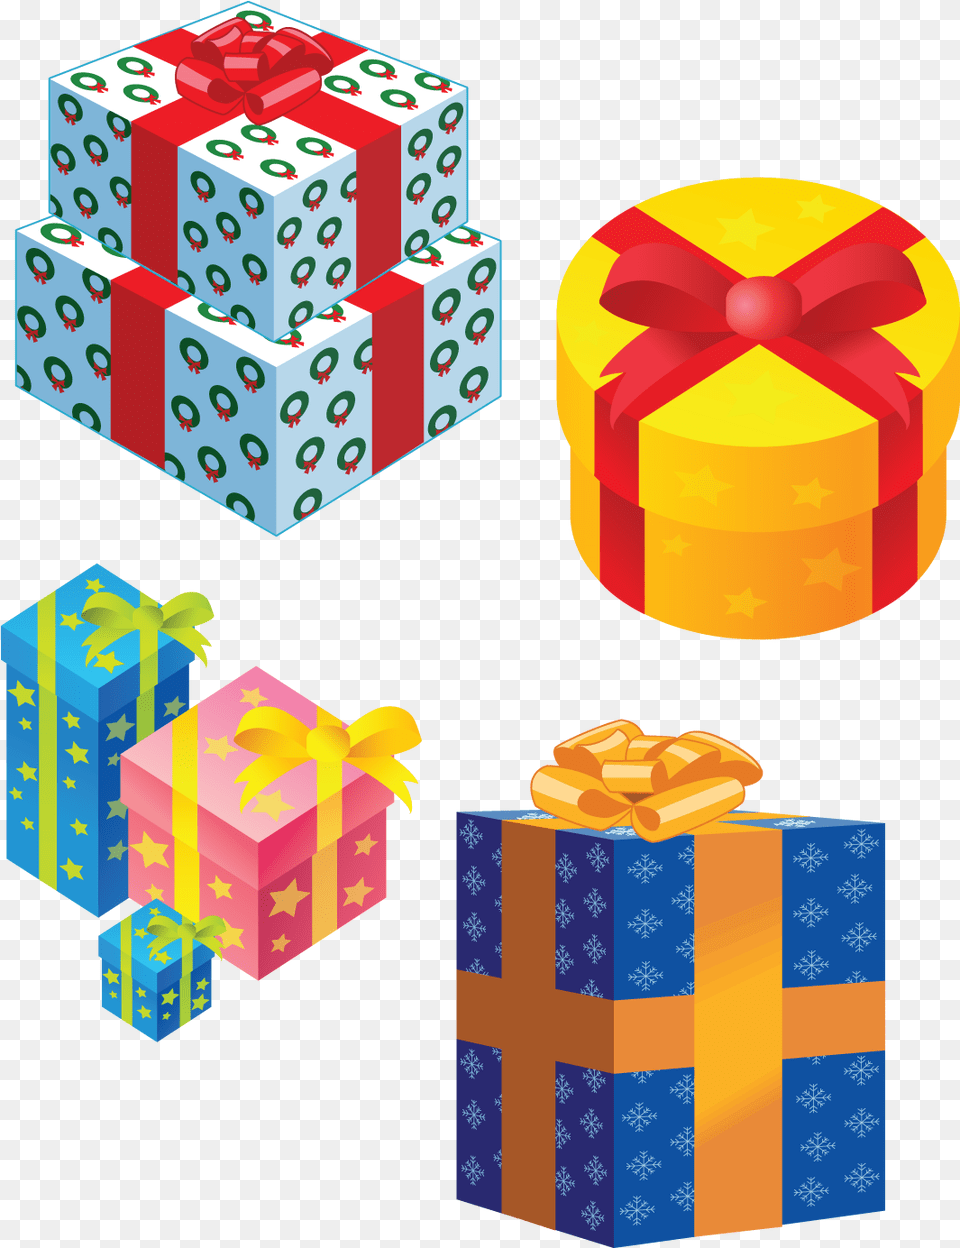 Gifts Images Christmas, Gift Png